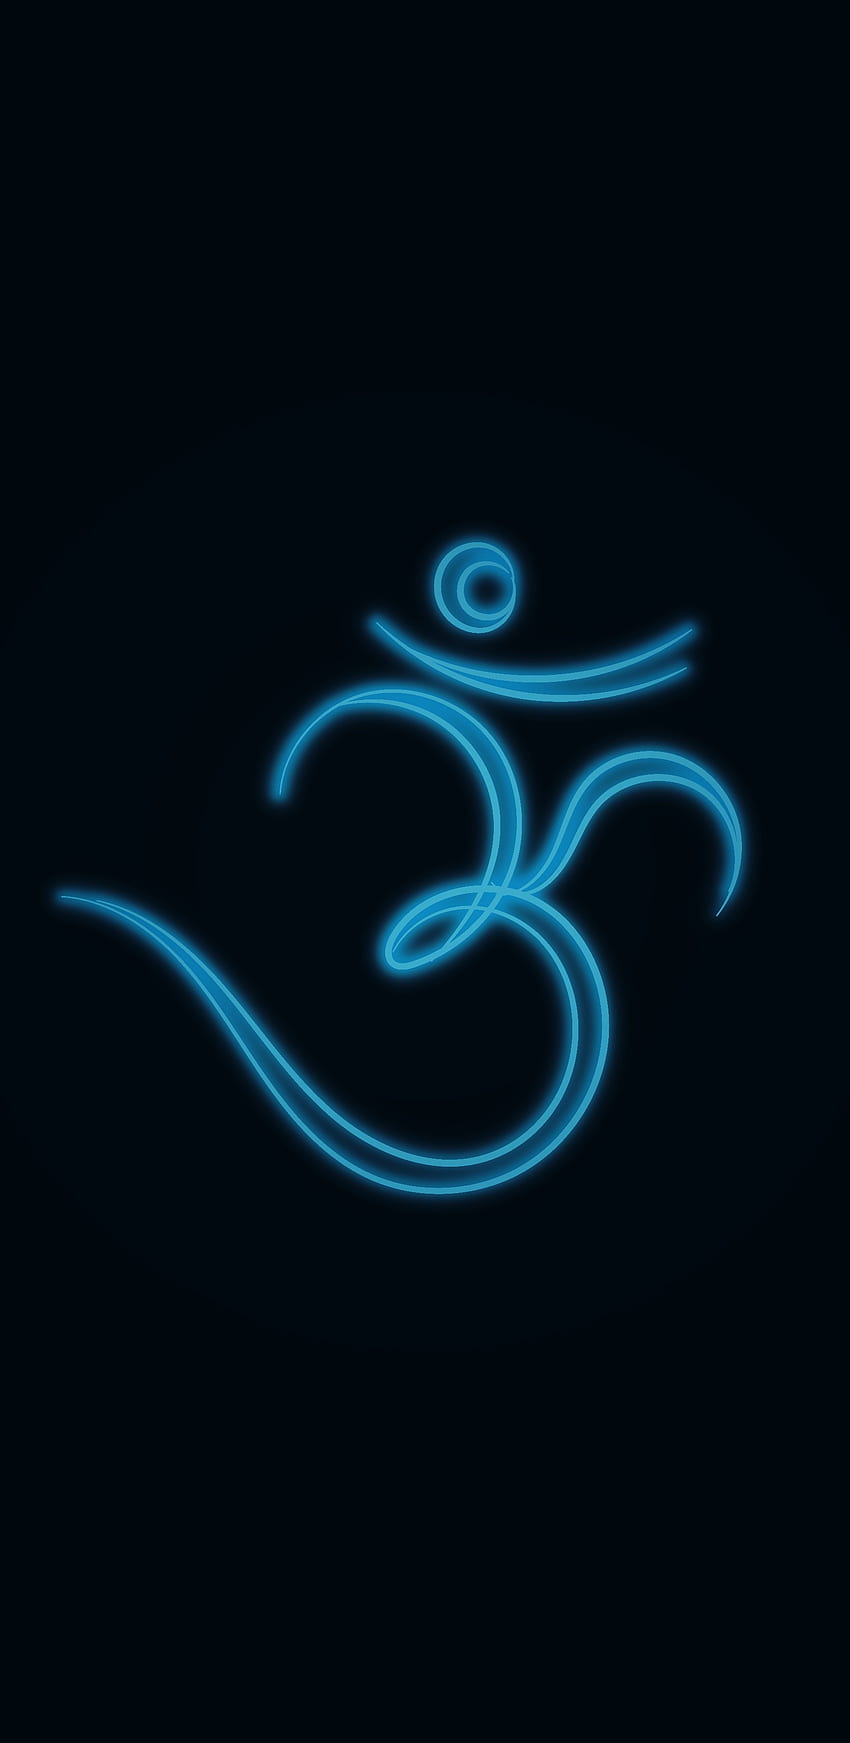 OM Wallpaper for Android Mobile | Mobile Wallpapers | Download Free  Android, iPhone, Samsung HD Backgrounds